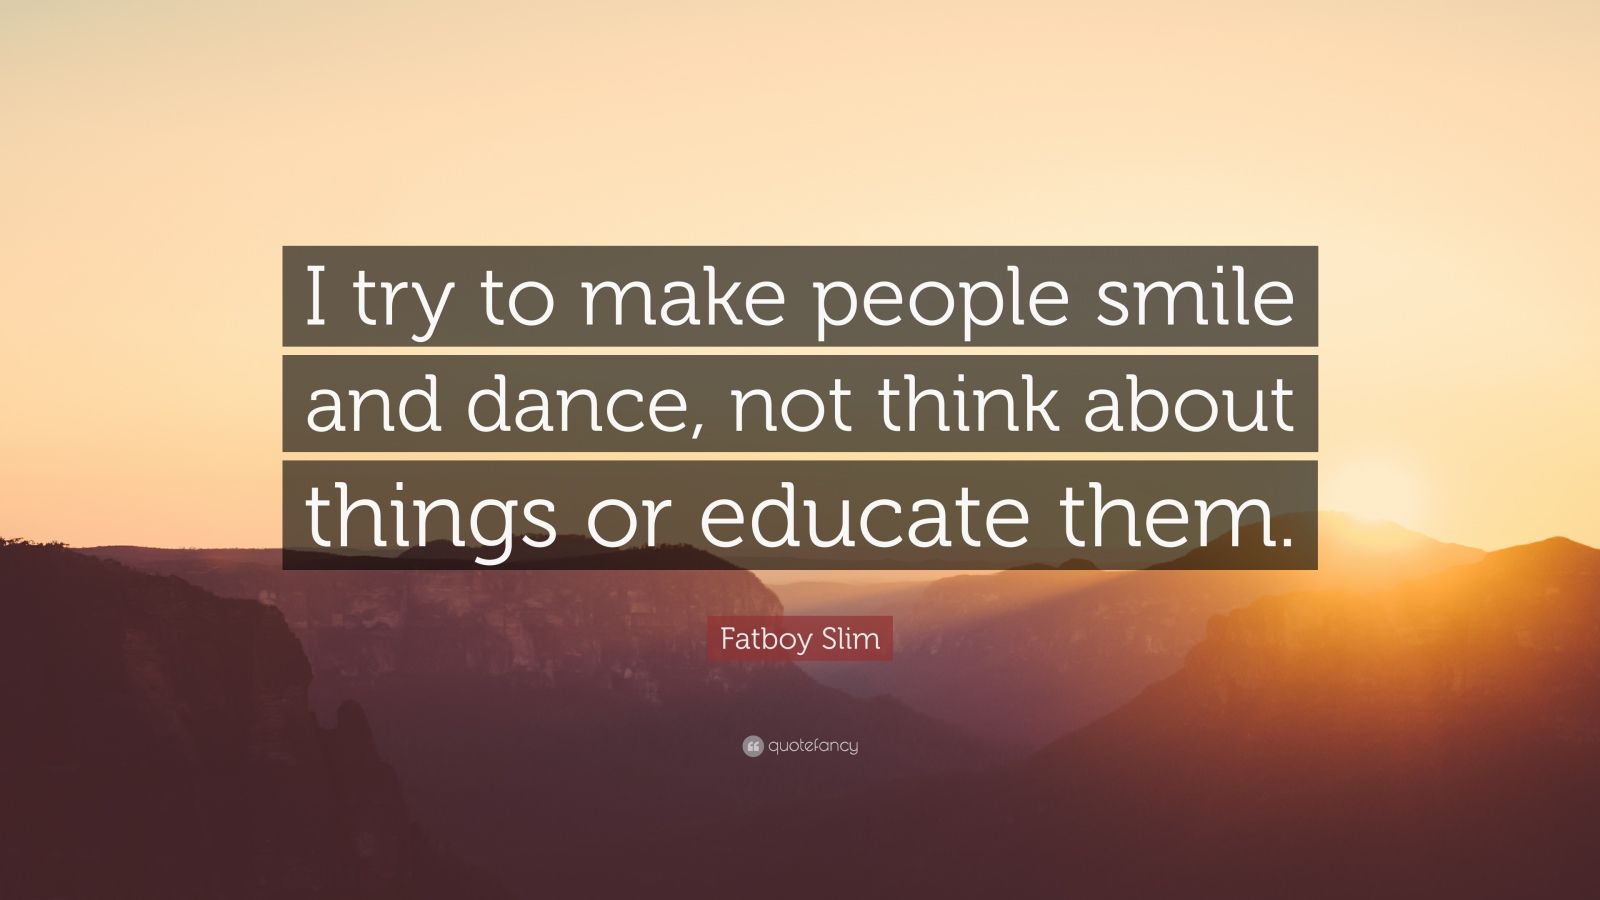 Top 7 Fatboy Slim Quotes | 2021 Edition | Free Images - QuoteFancy